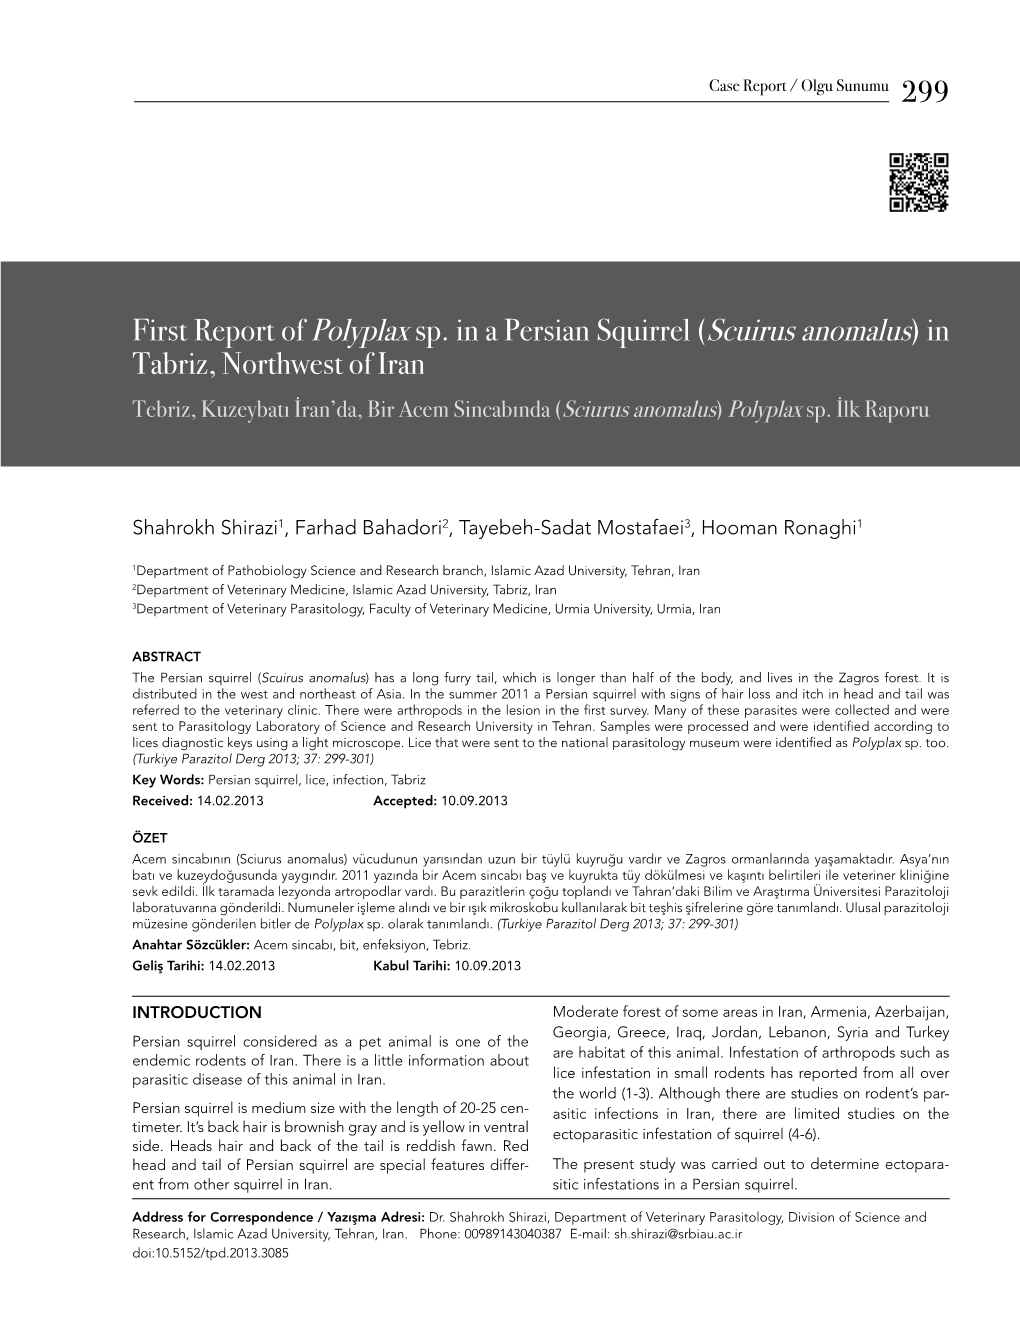 First Report of Polyplax Sp. in a Persian Squirrel